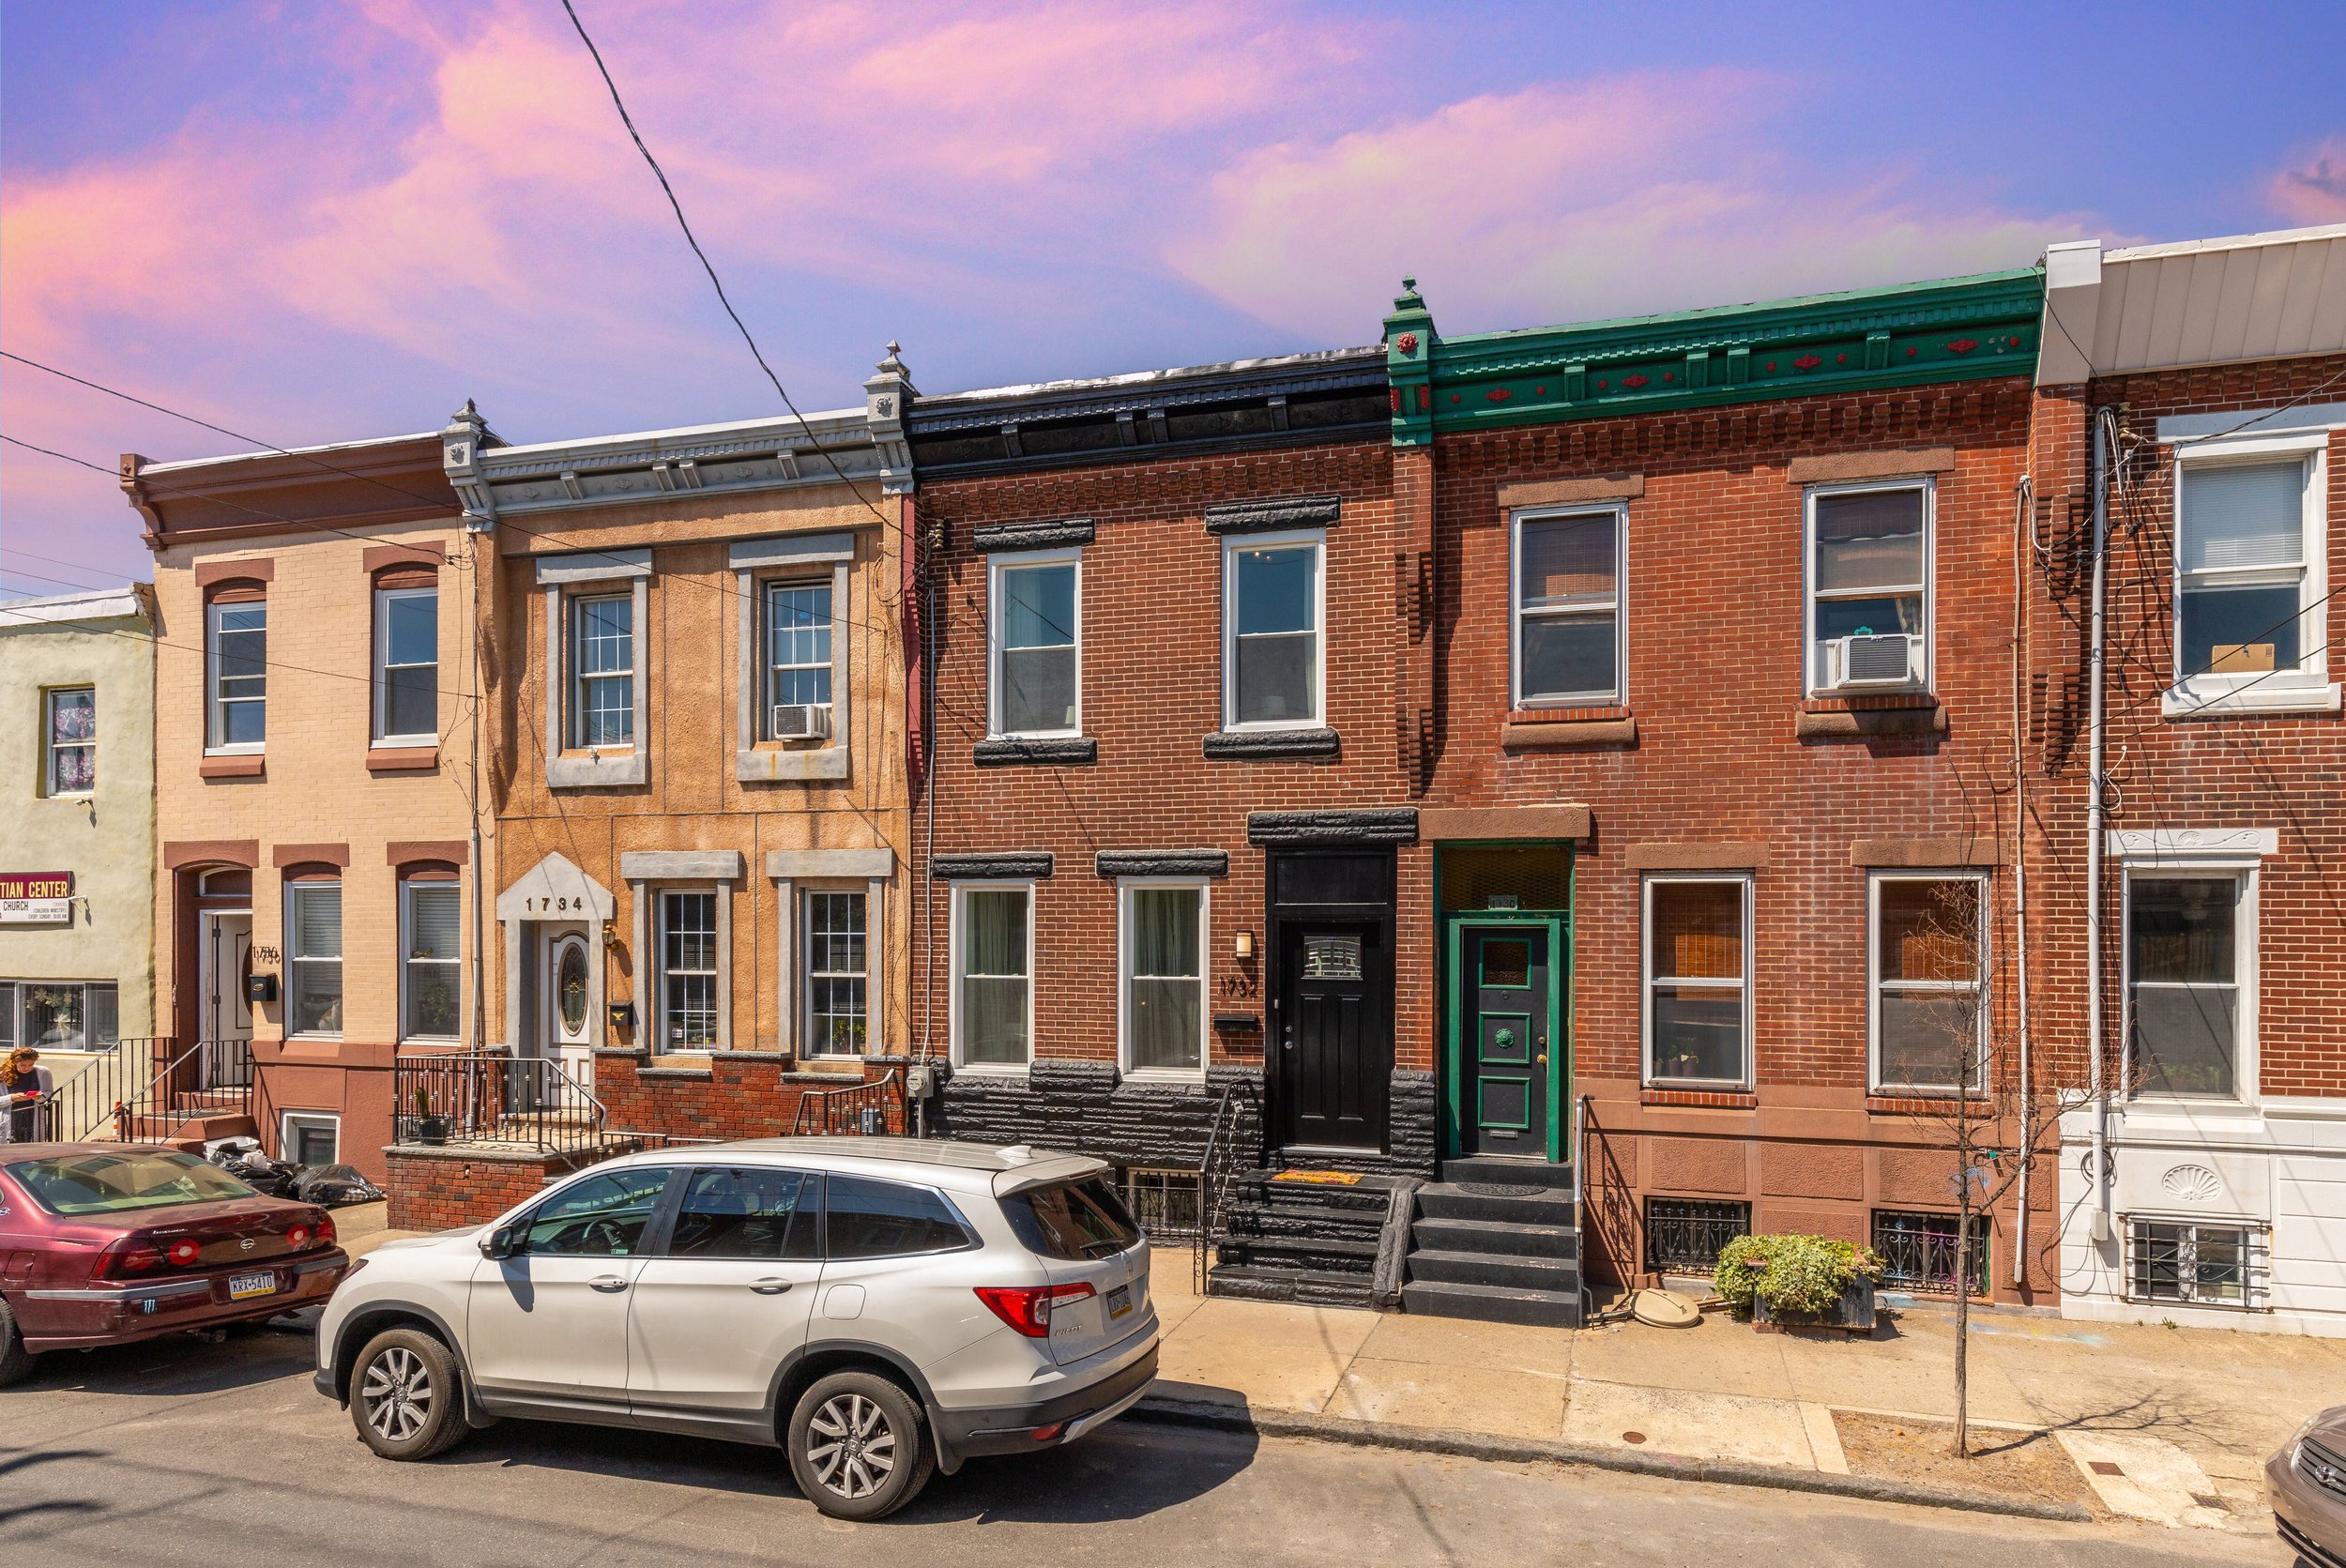 732 S 19TH ST PHOTOGRAPHY Ⓒ WEFILMPHILLY-60 SUNSET.jpg